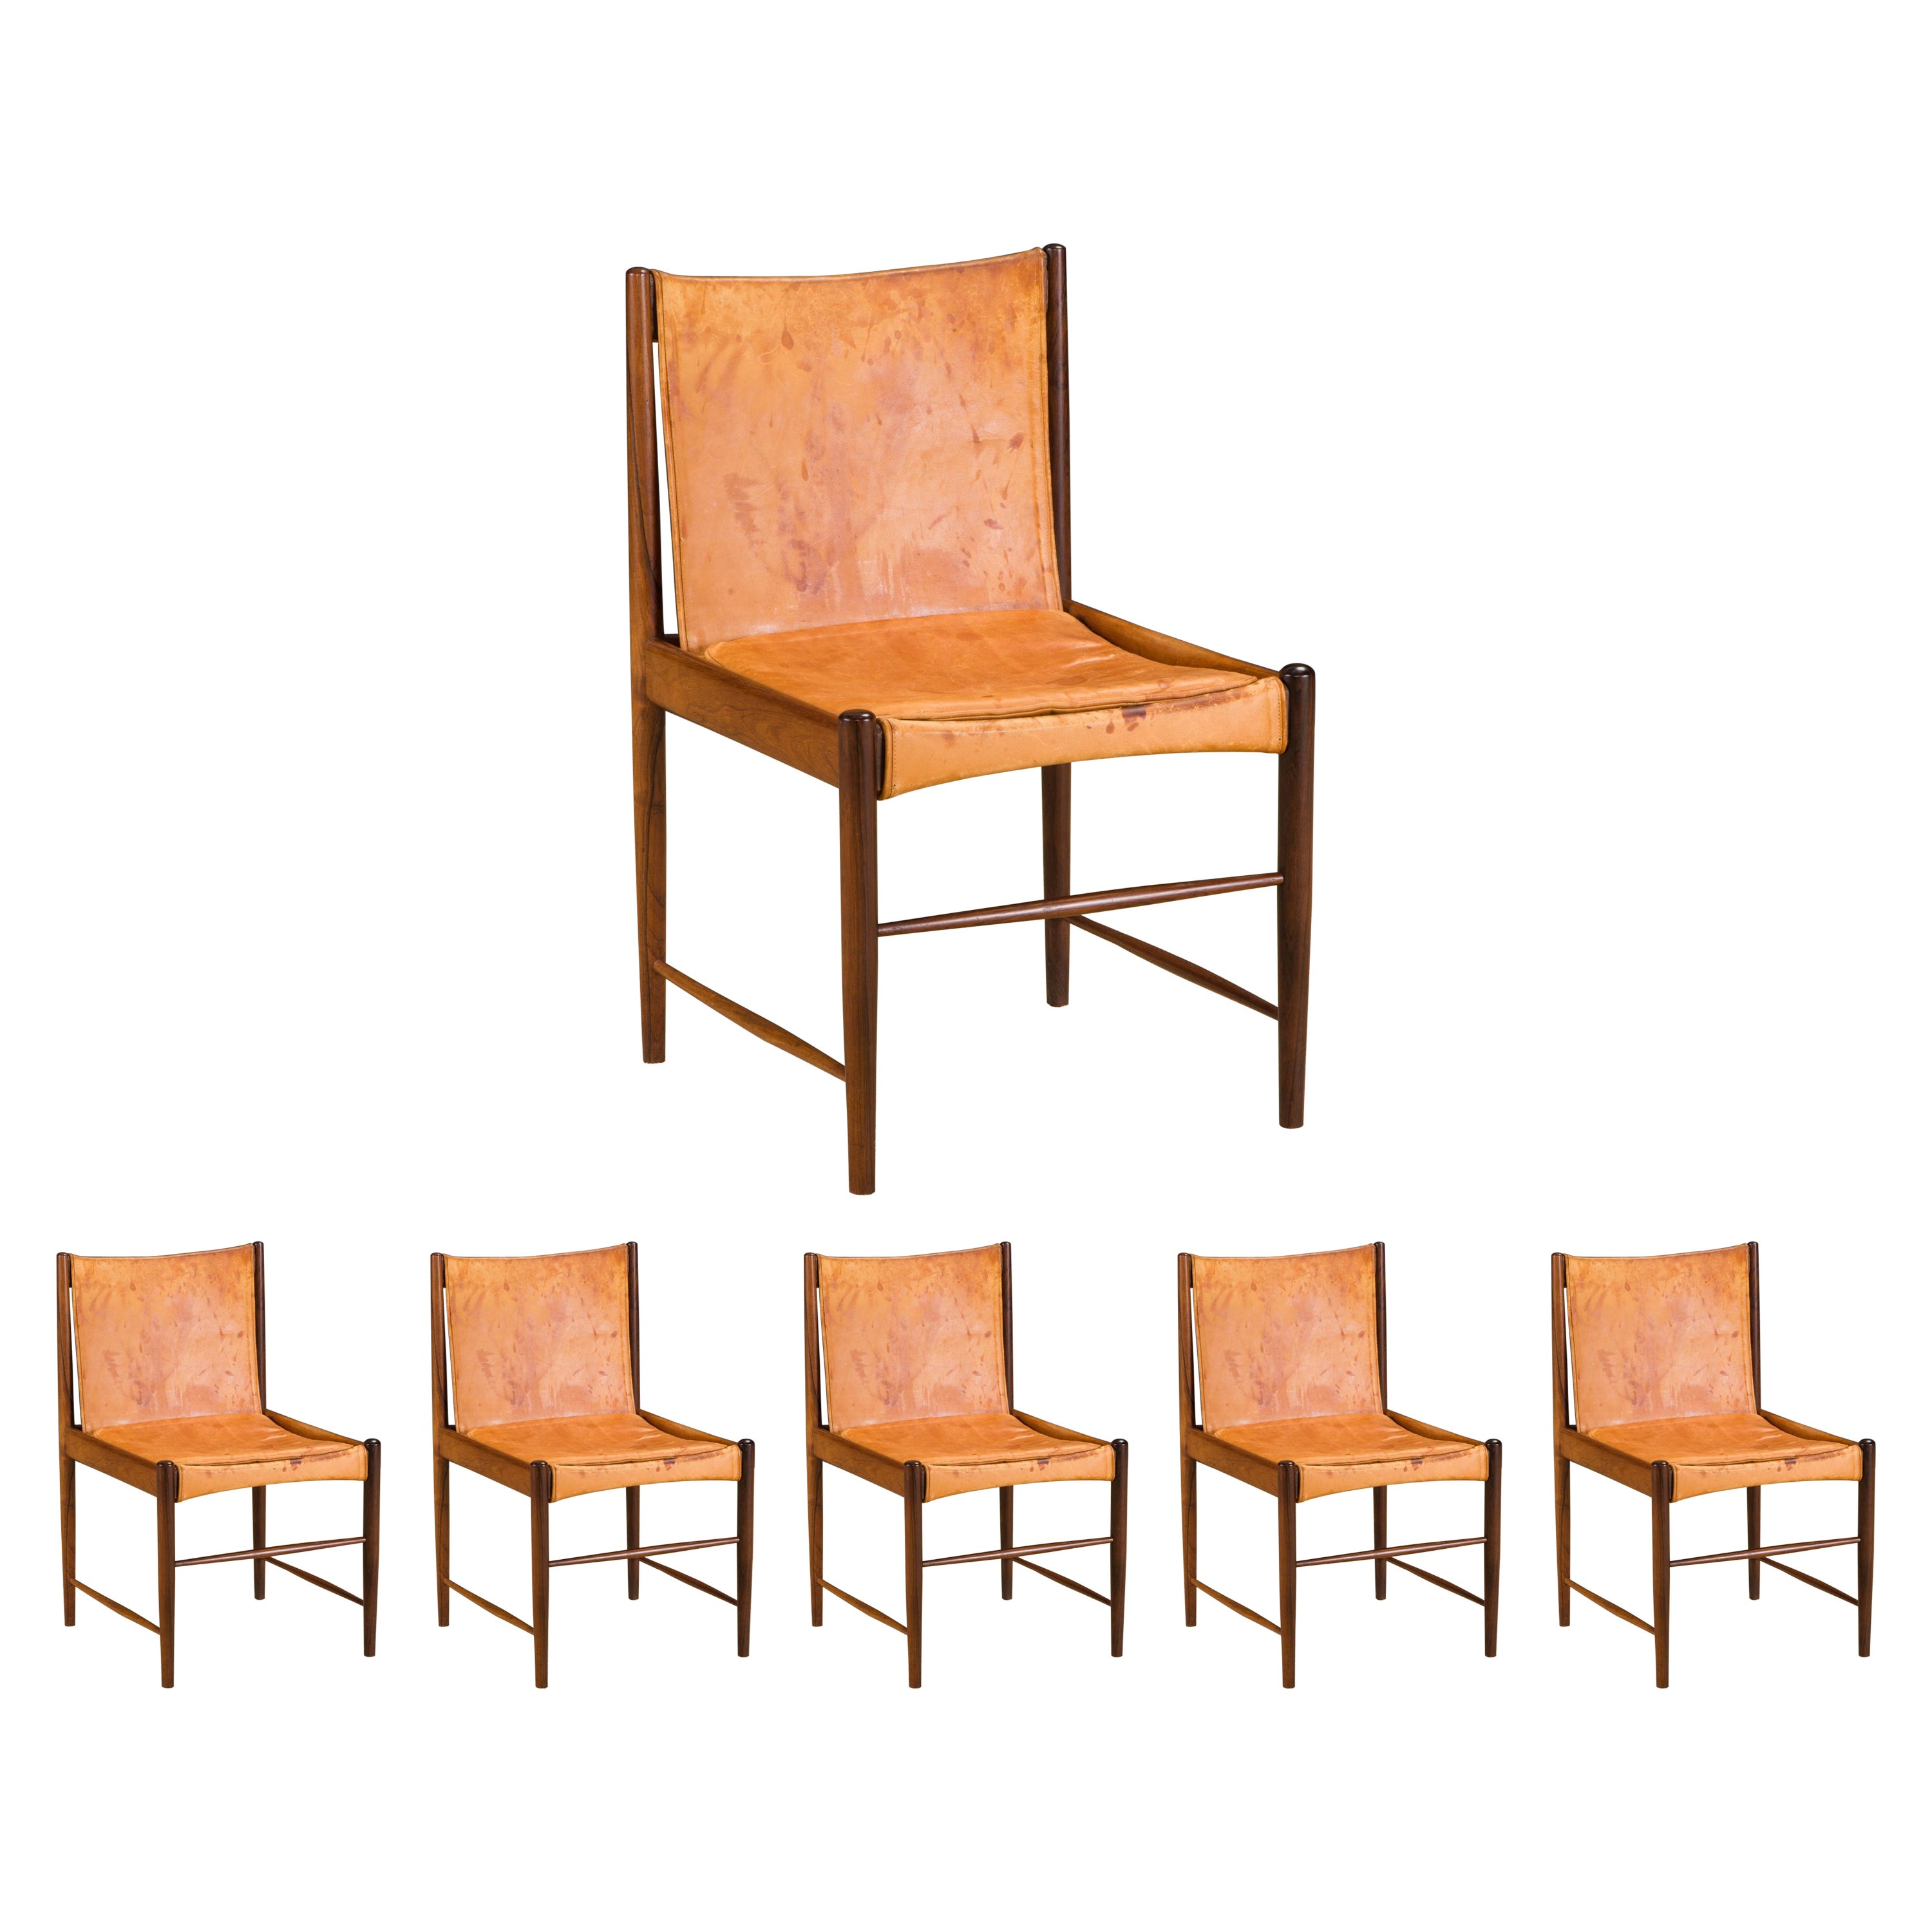 Sergio Rodrigues for Oca Jacaranda & Leather Cantu Chairs, c 1959 Brazil, Signed For Sale